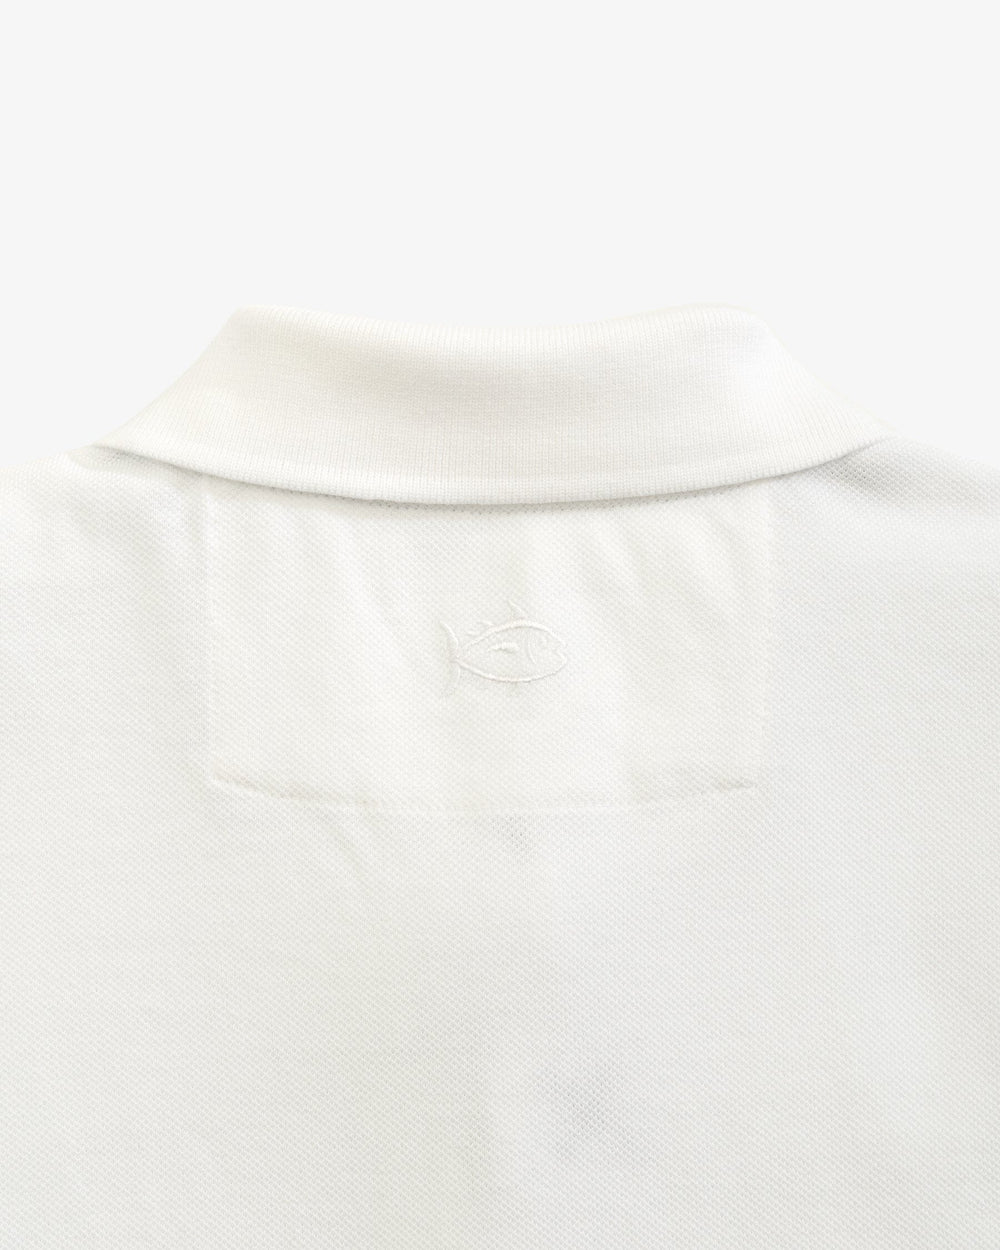 The yoke view of the Virginia Cavaliers Skipjack Polo by Southern Tide - Classic White